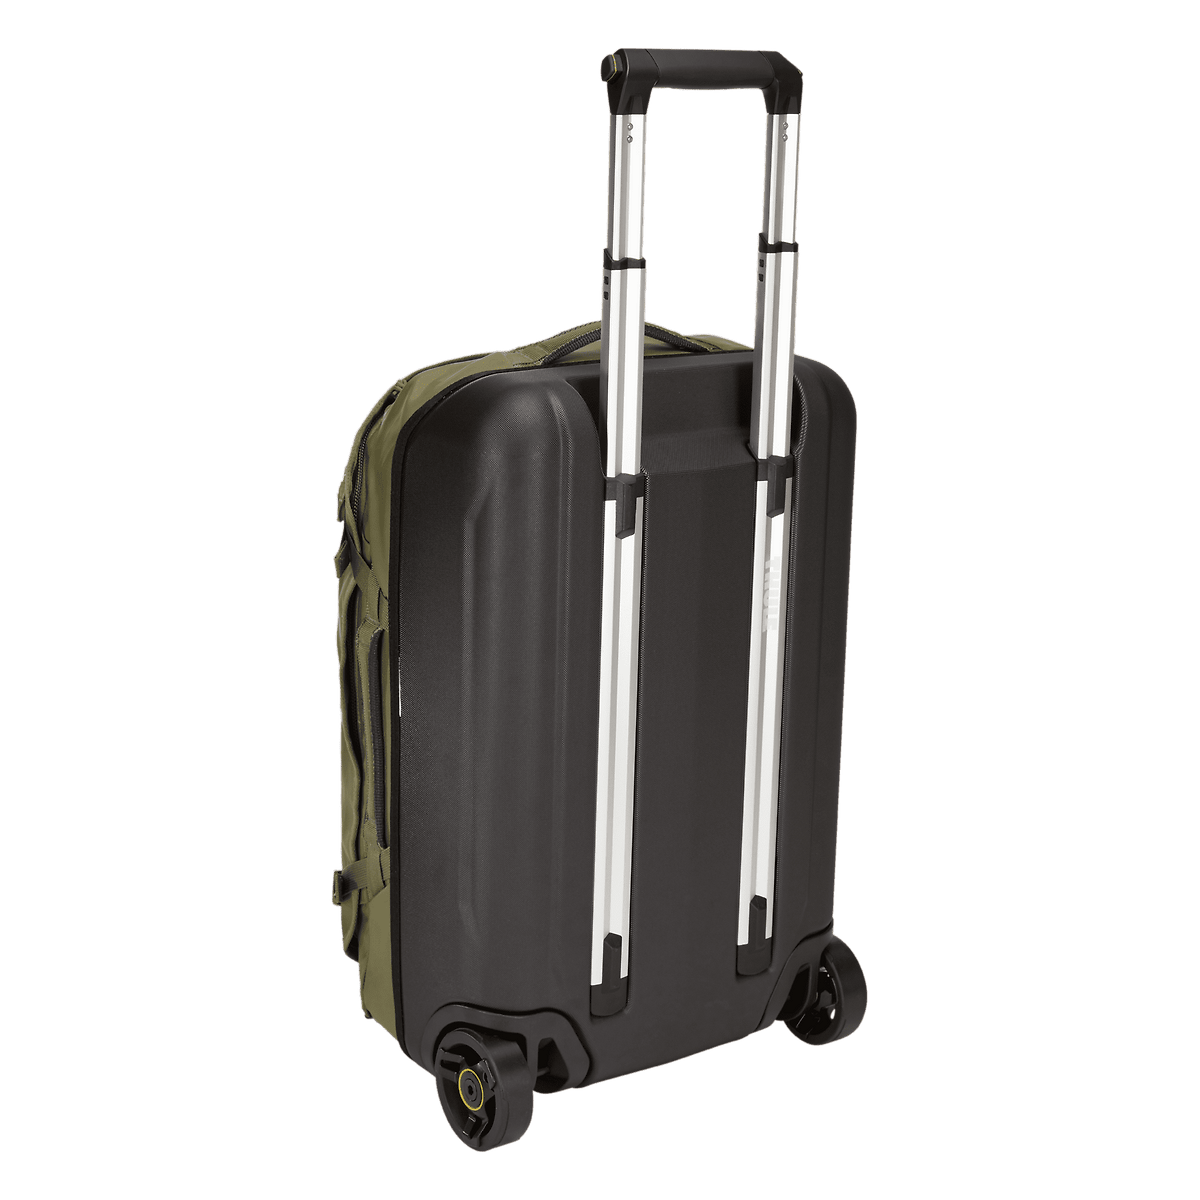 Thule Chasm carry on 2-wheeled Softsided duffel bag 40L